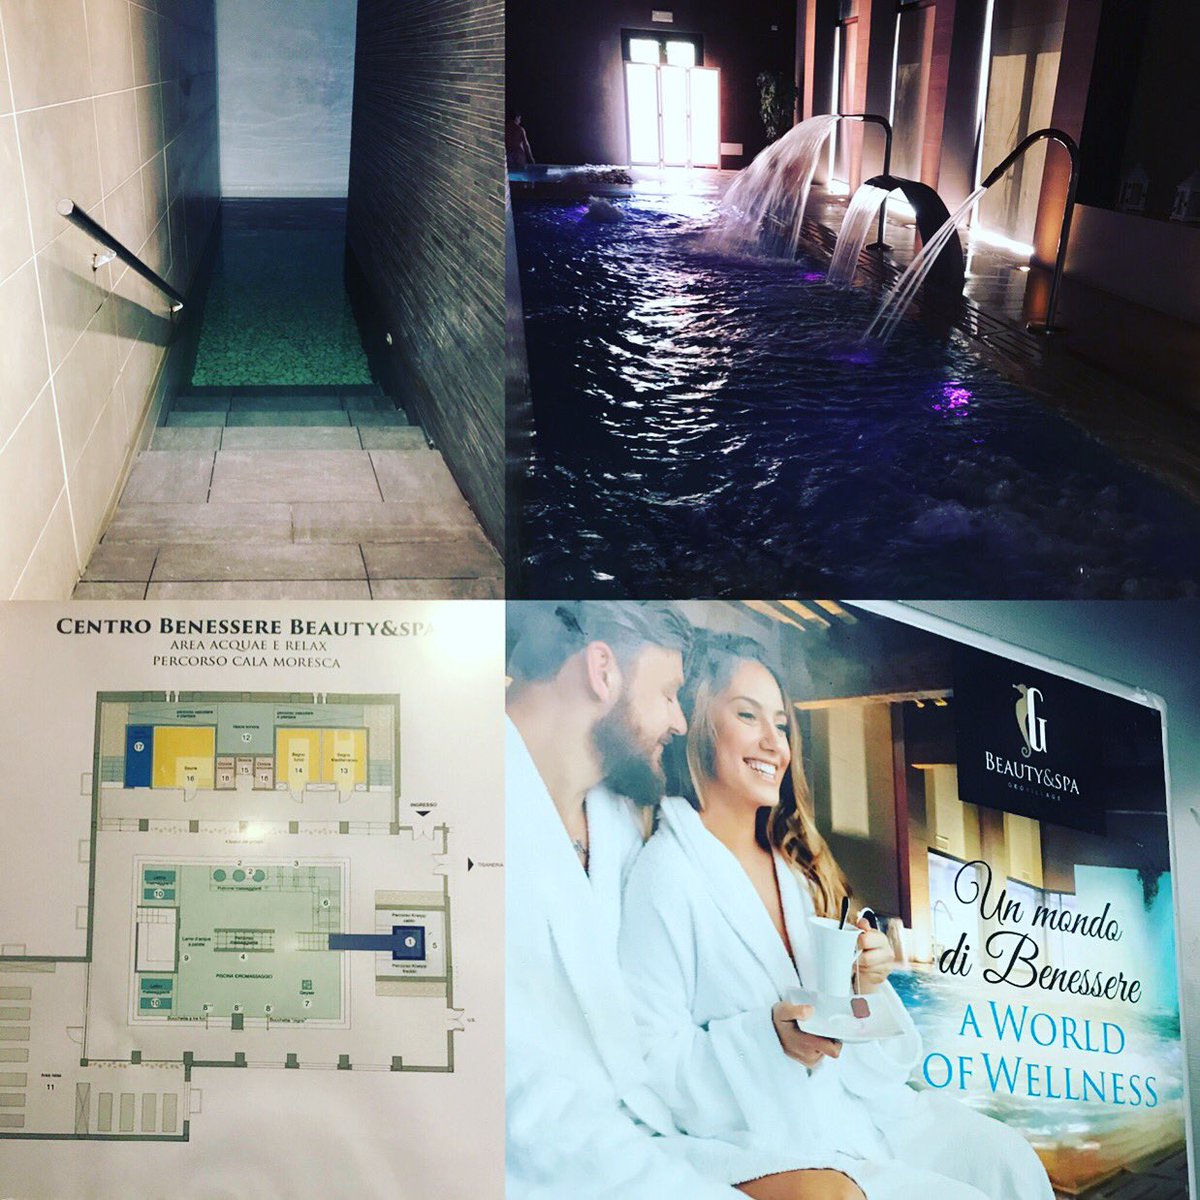 Ciao! @GeovillageHotel Sport and Wellness Resort Always ‘researching’ Spa wherever we may be - best way to end our trip #spadesign #italy #spatreatments #wellness #refexologywalk #hydrotherapy #plunge #cryotherapy #thermotherapy #contrasttherapy #italy #spaeducationacademy